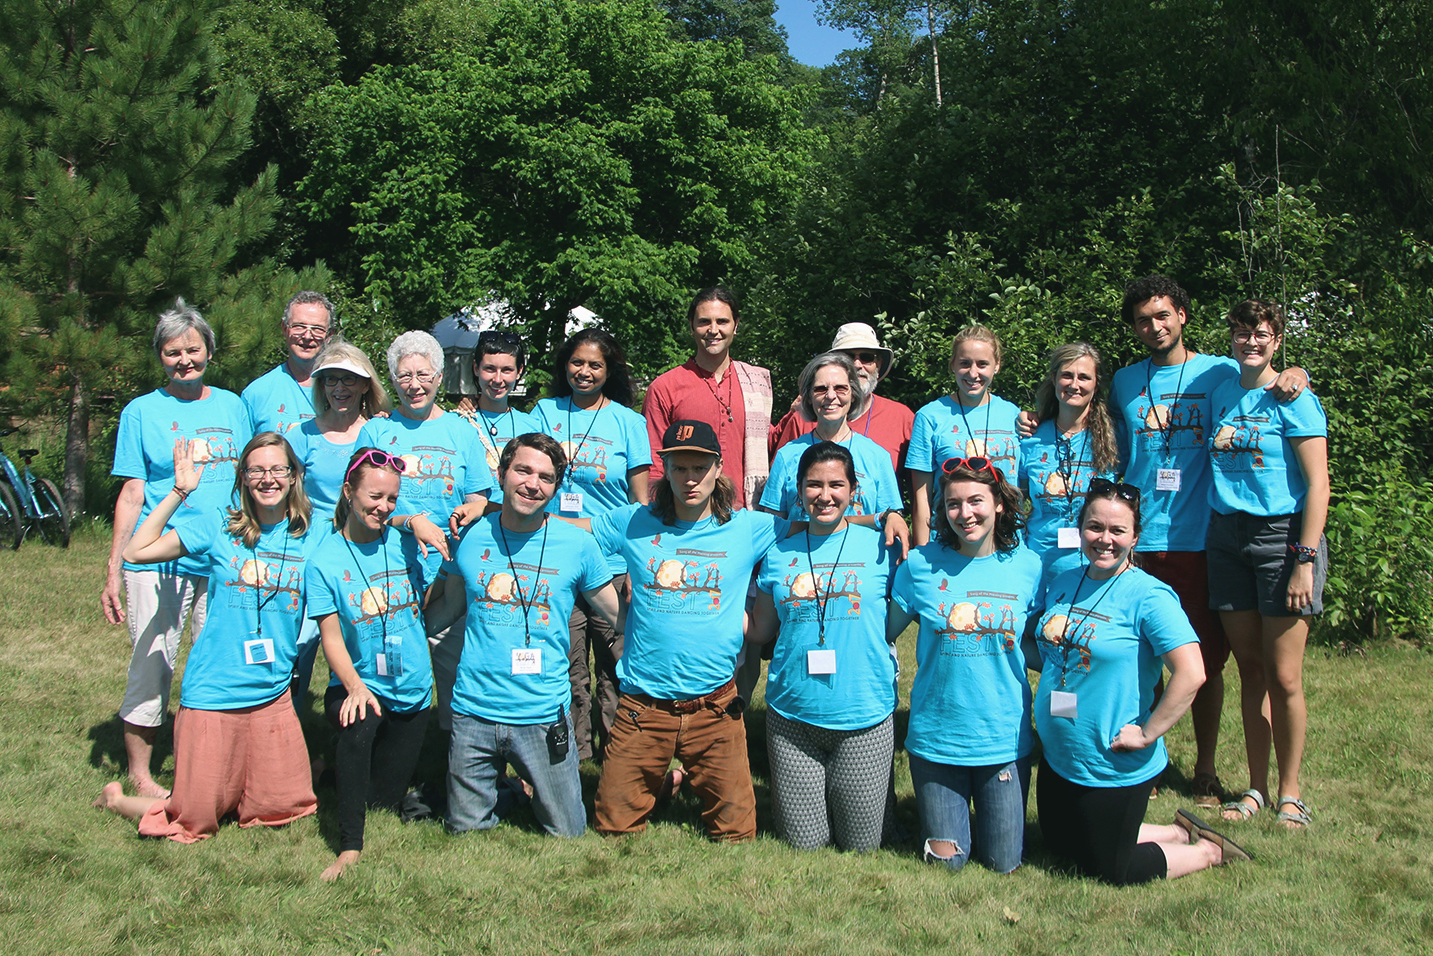 Group photo of festival workers in event t-shirts